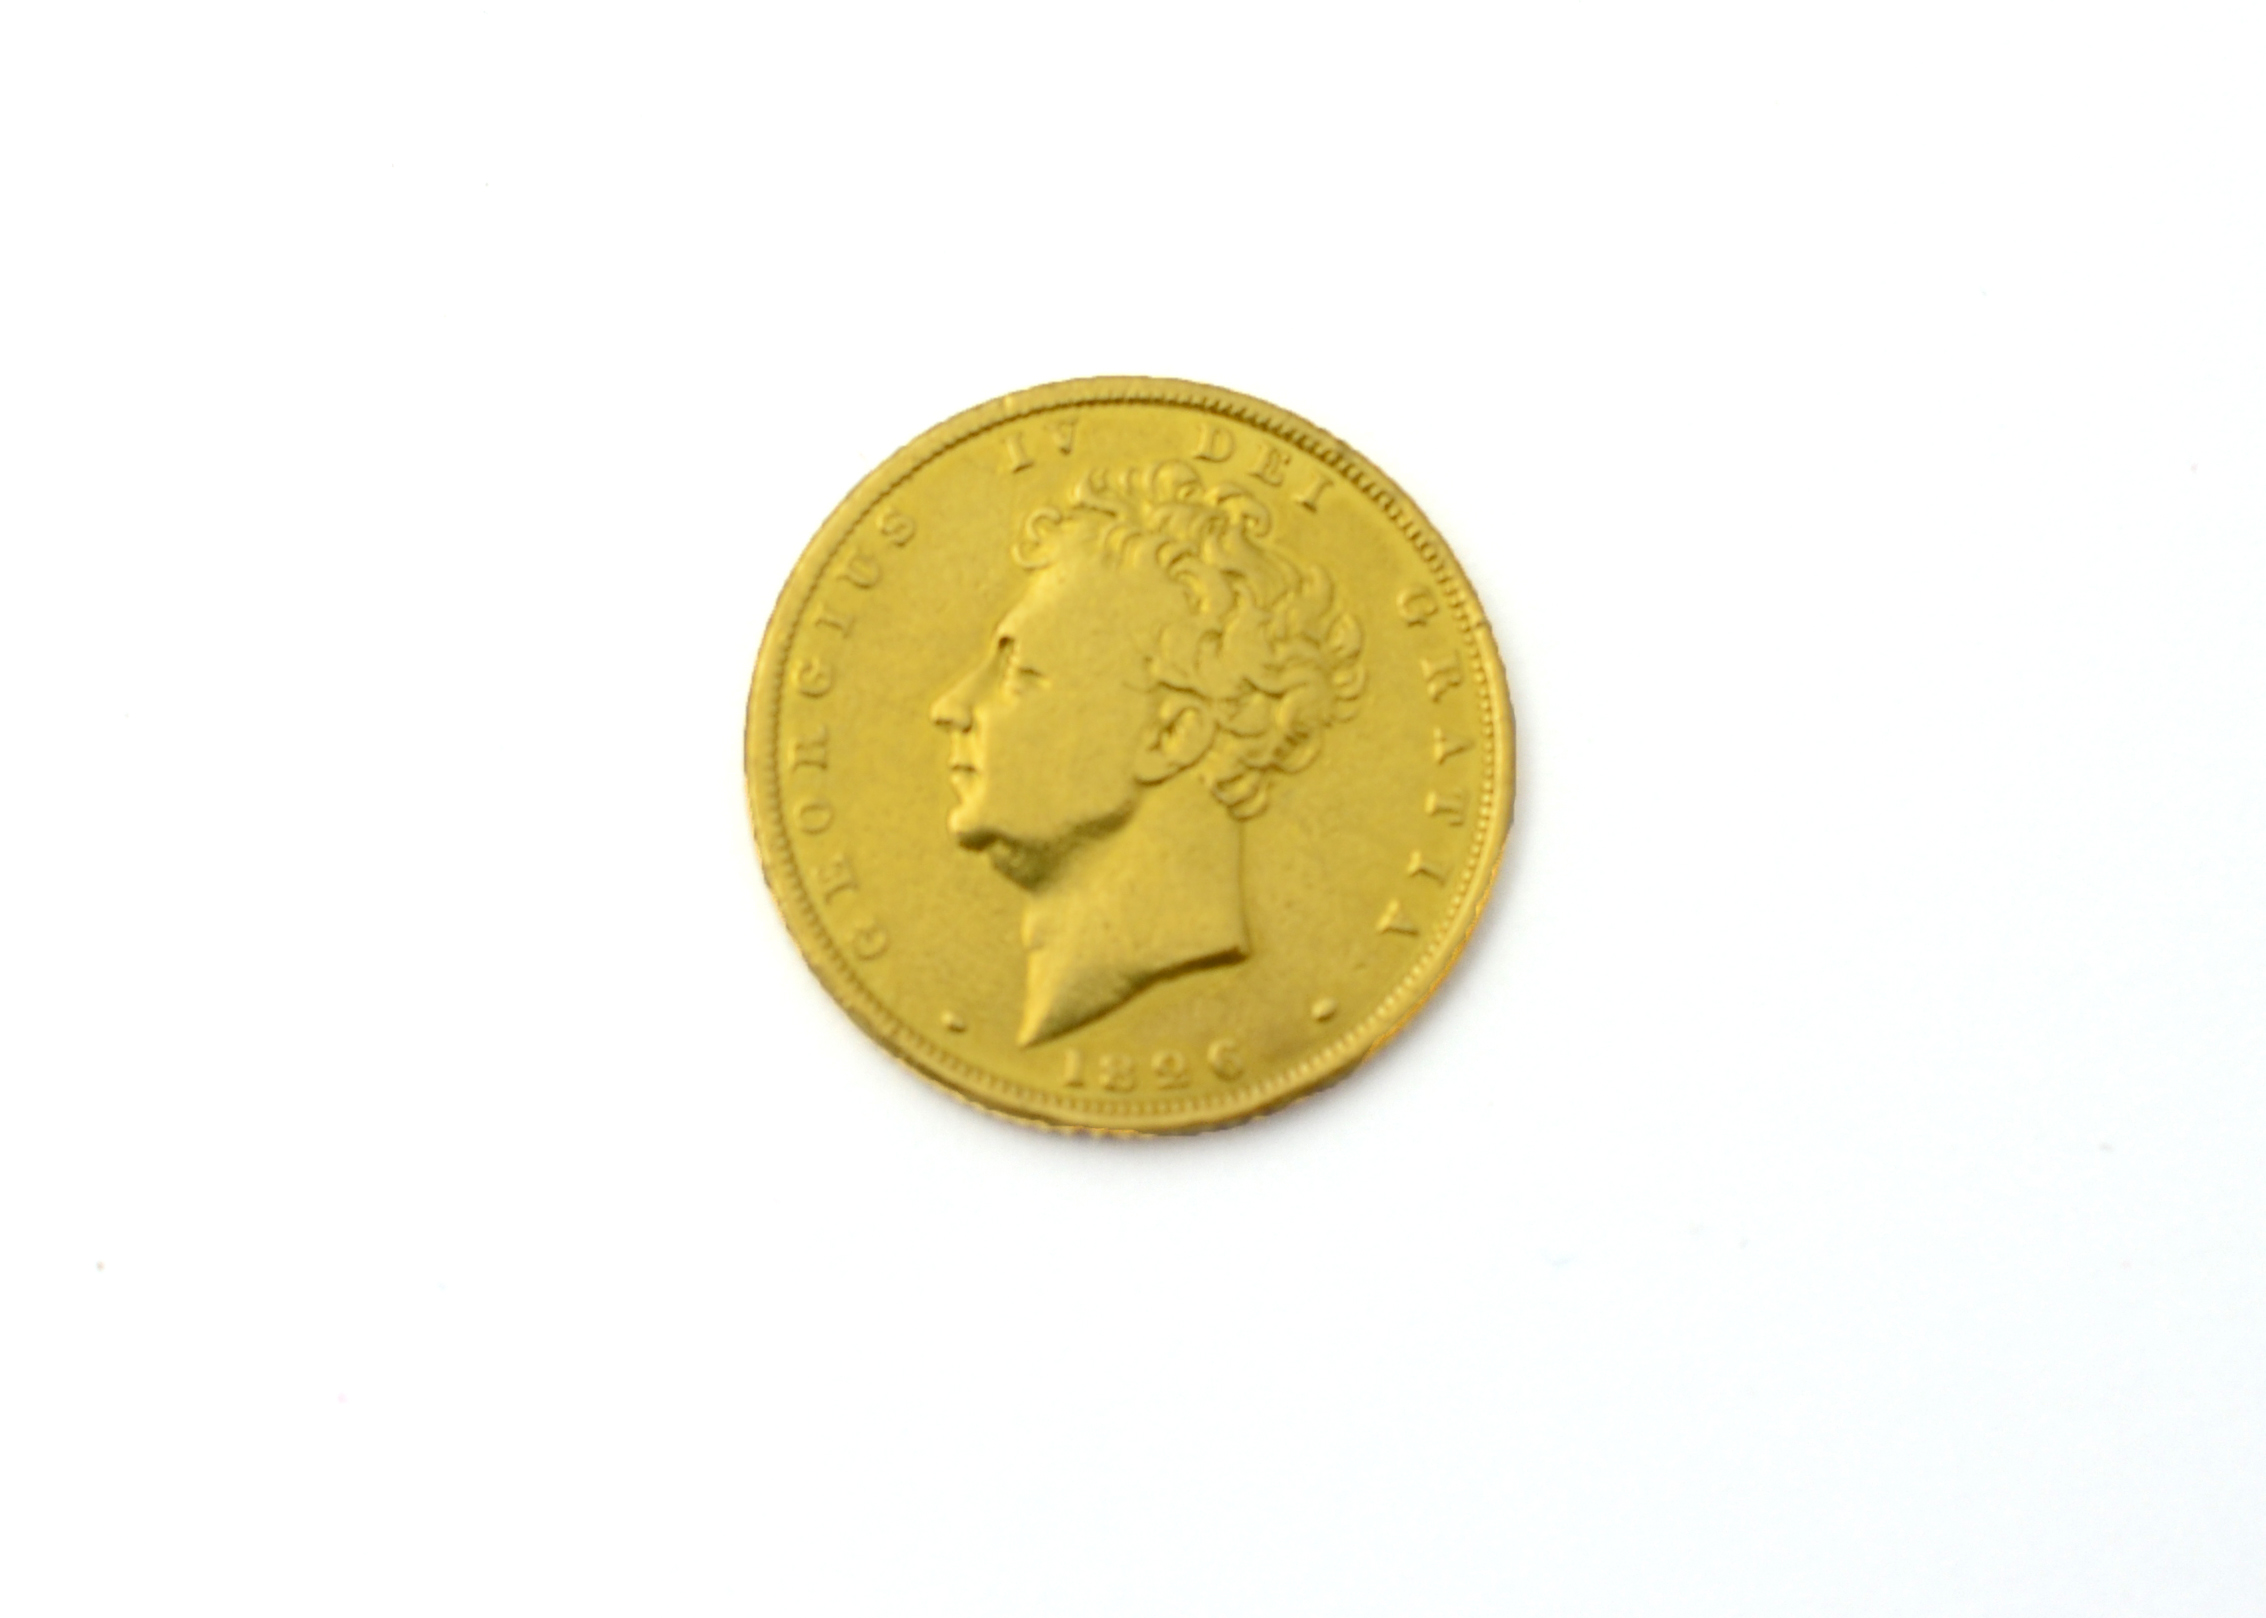 An 1826 full sovereign - condition VF (ex mount) - Image 2 of 2